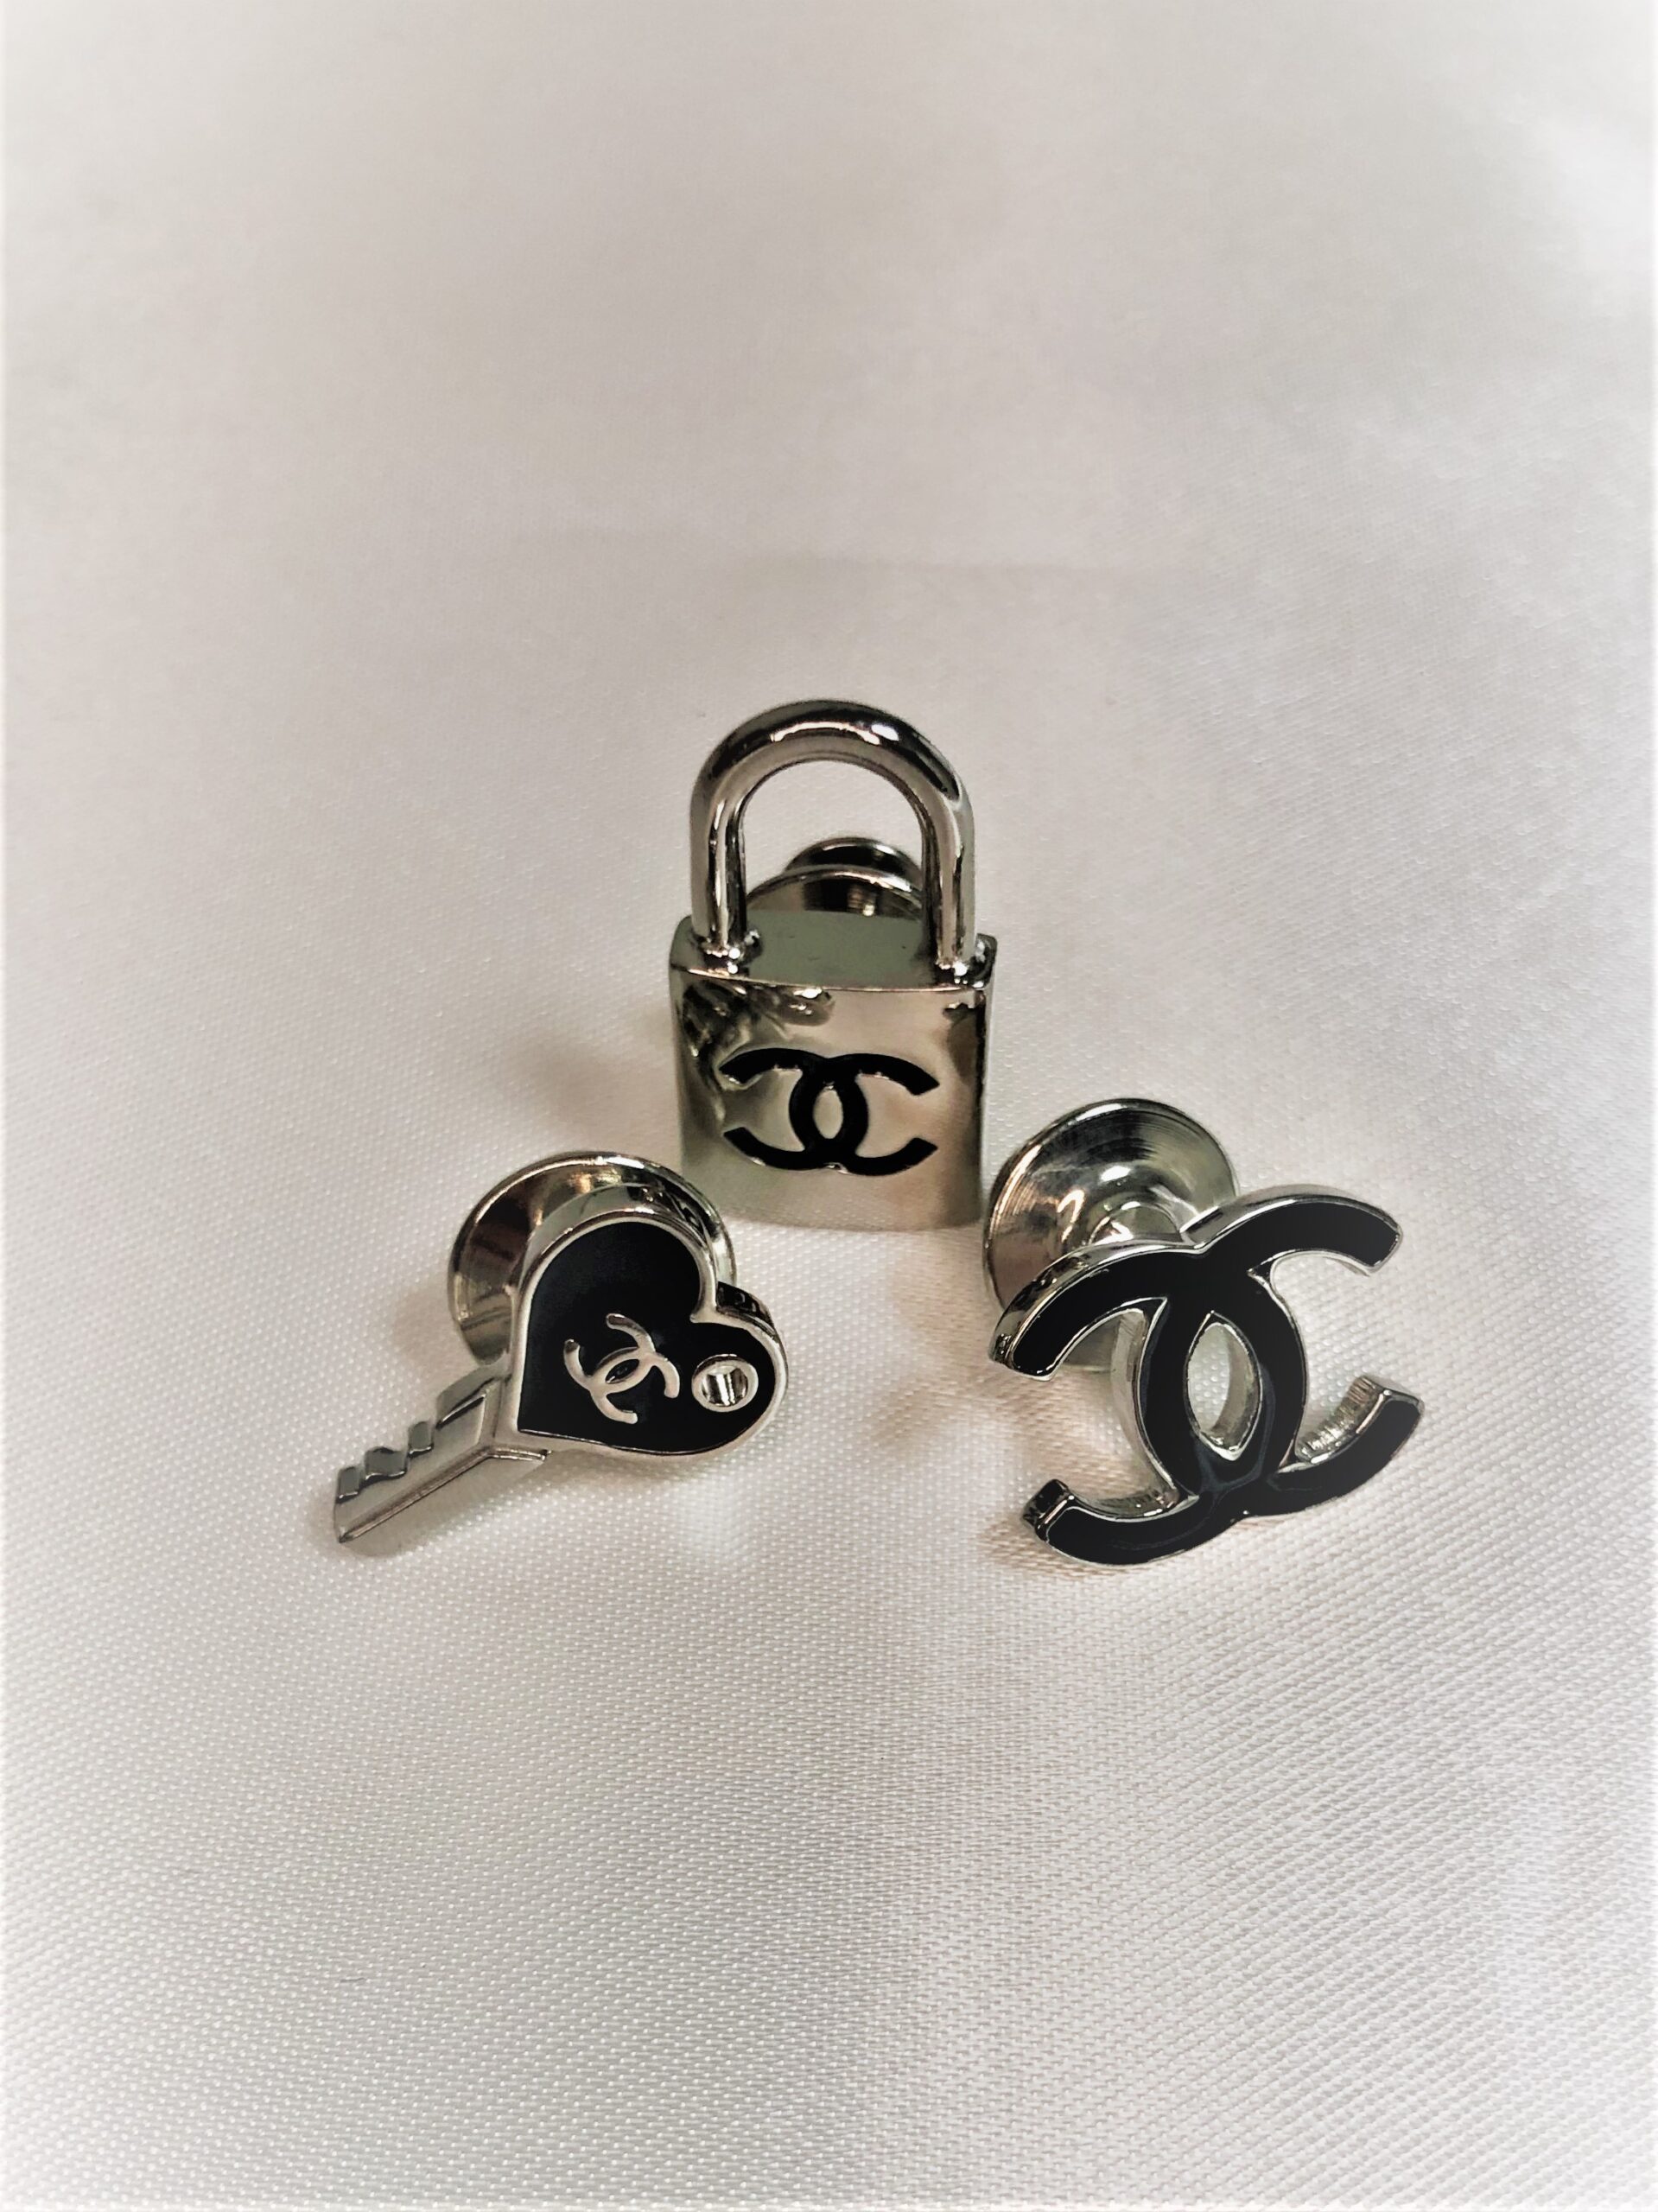 sold-out CHANEL ピンバッチ 3Pセット - Ur